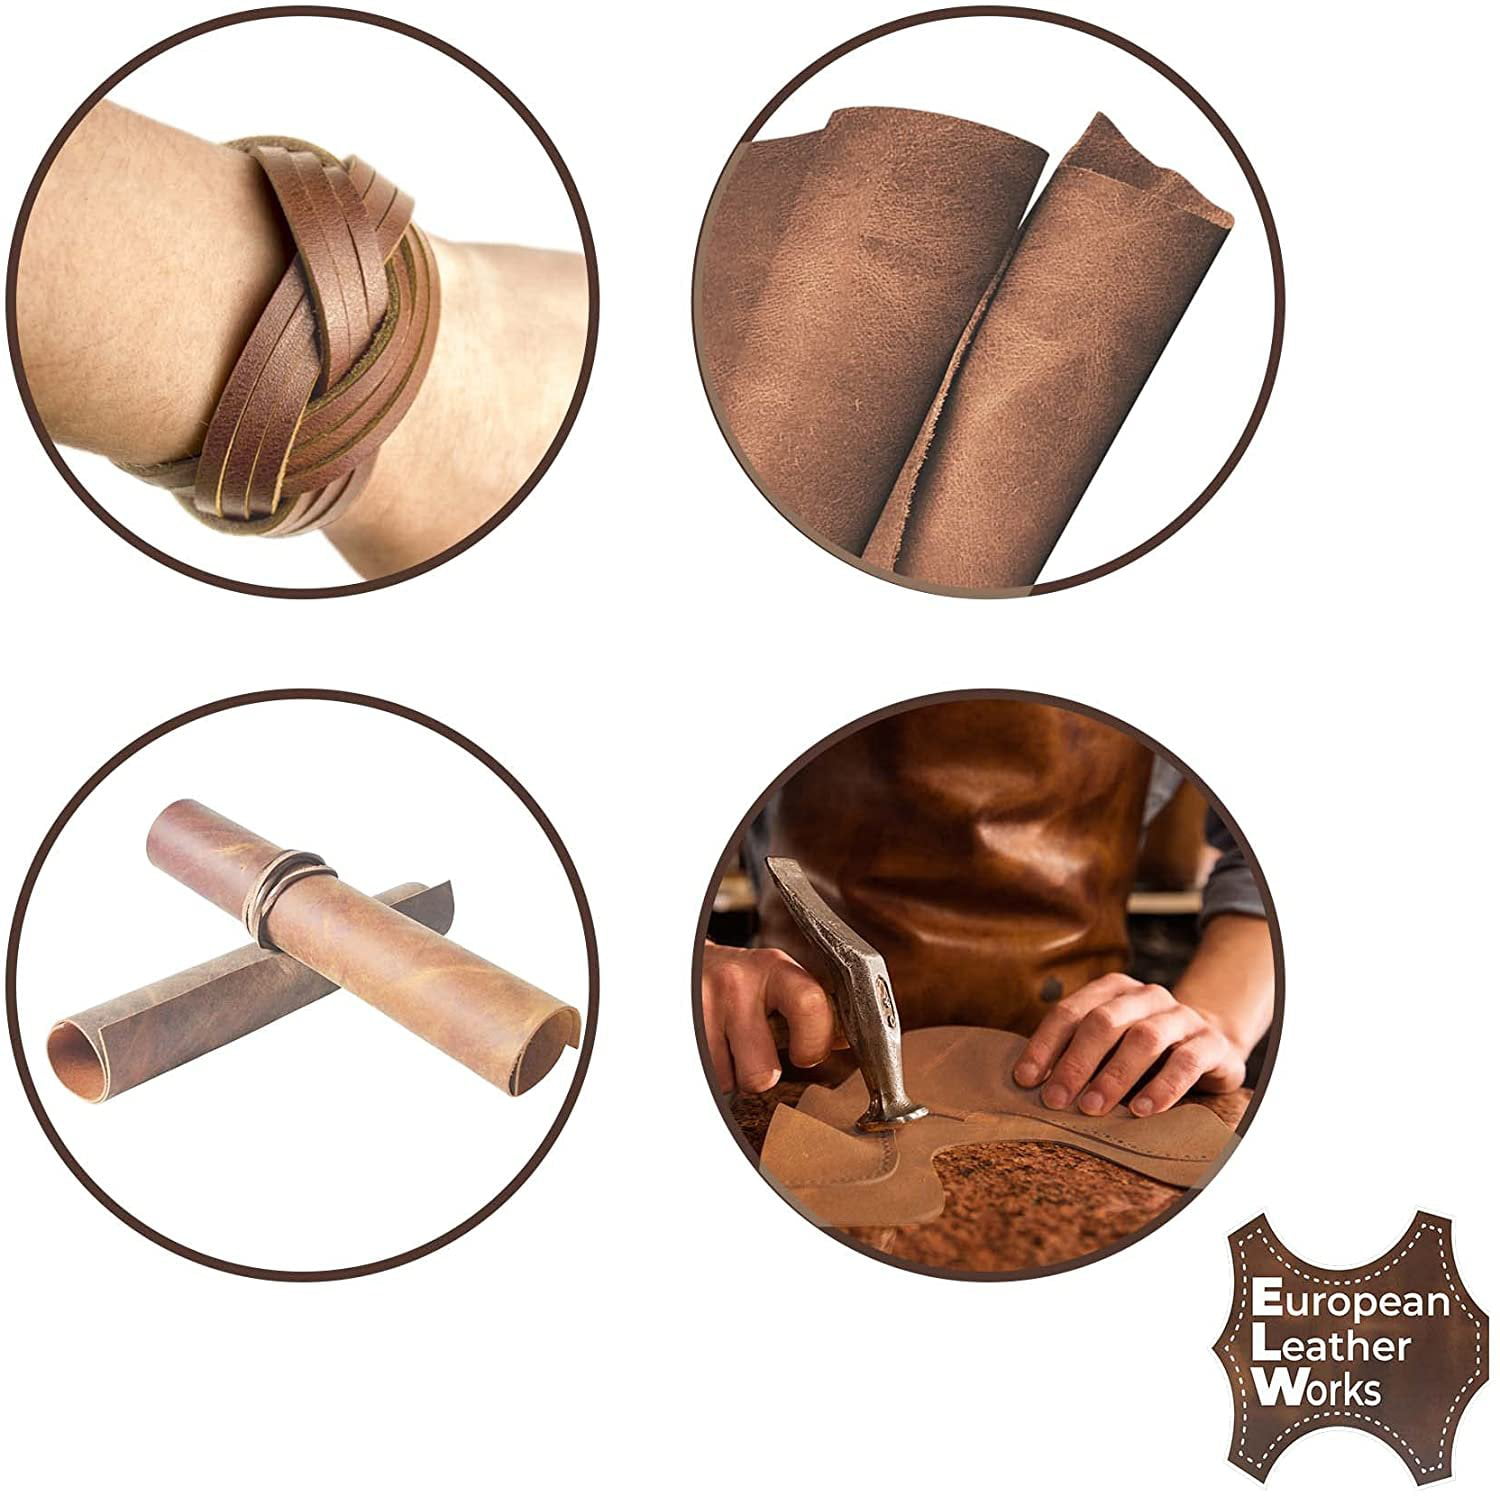 European Leather Work 9-10 oz. (3.6-4mm) Oil-Tanned Leather Scraps Size: 2  LB - Bourbon Brown Cowhide Full Grain Leather for Tooling, Accessories